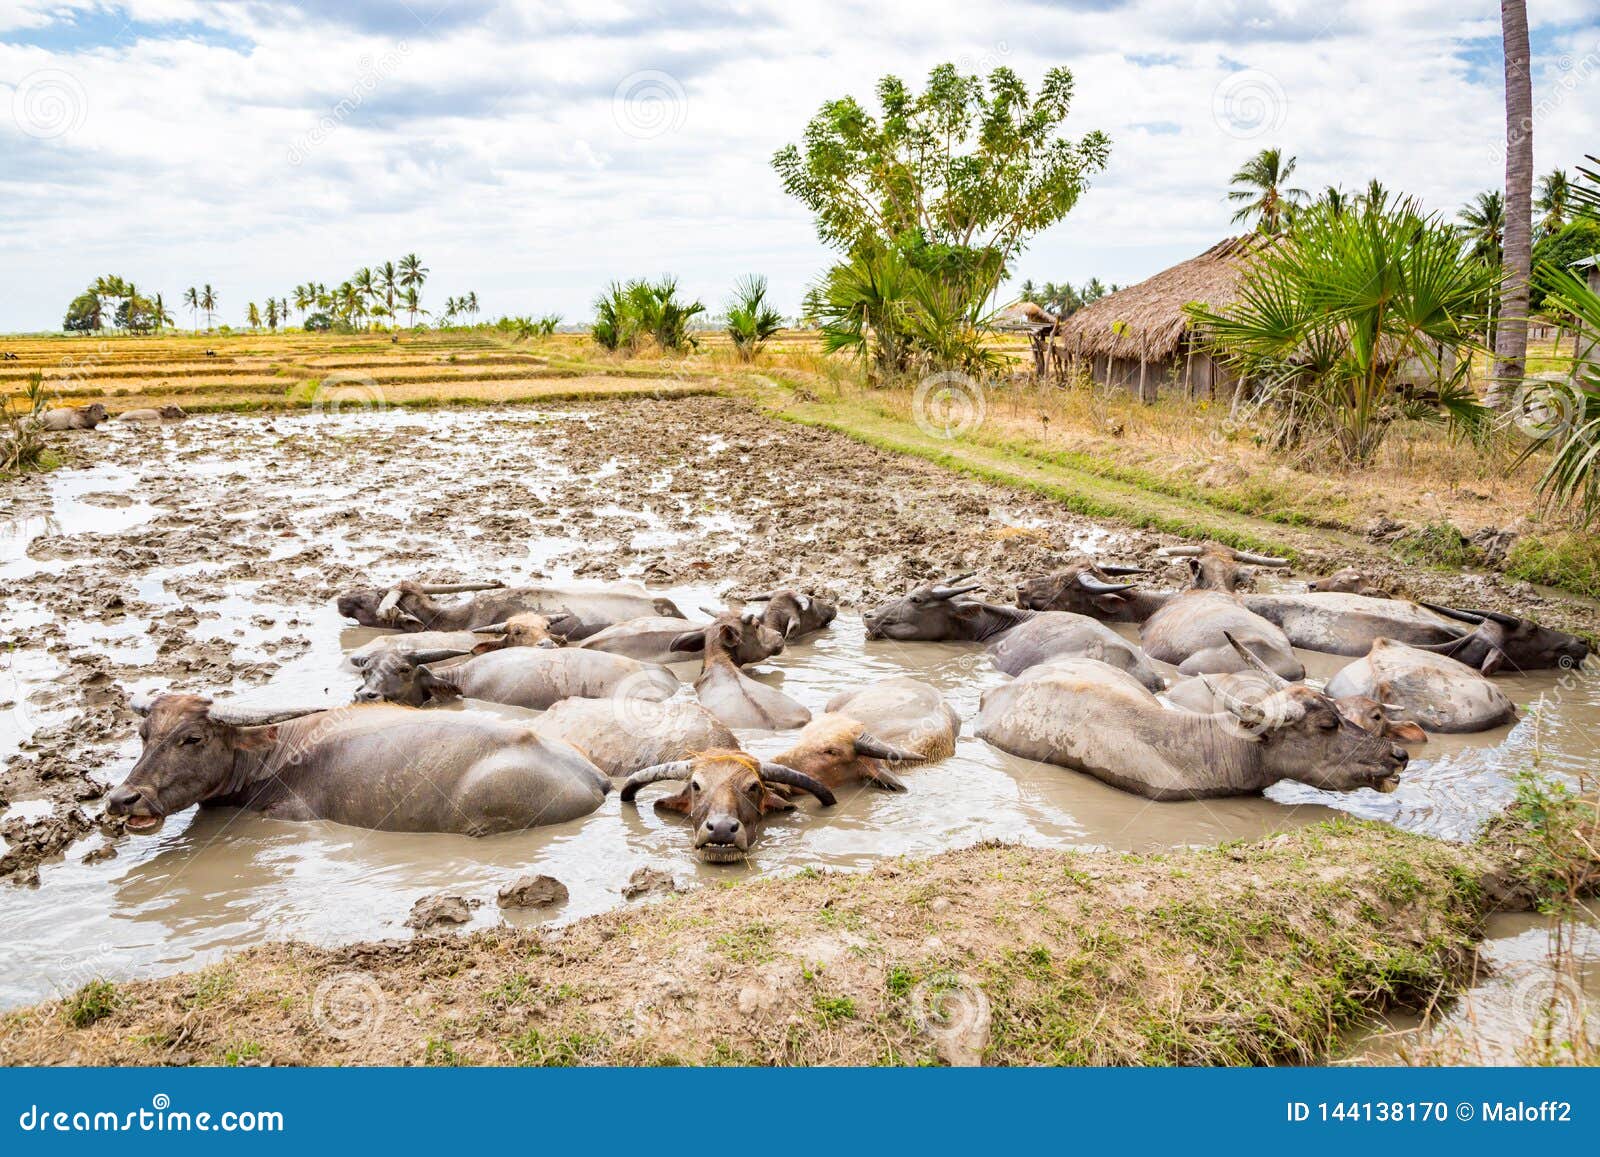 animal stock in east timor - timor-leste. herd of cattle, zebu, buffaloes or cows in a field swims in a dirt, mud, hight water.